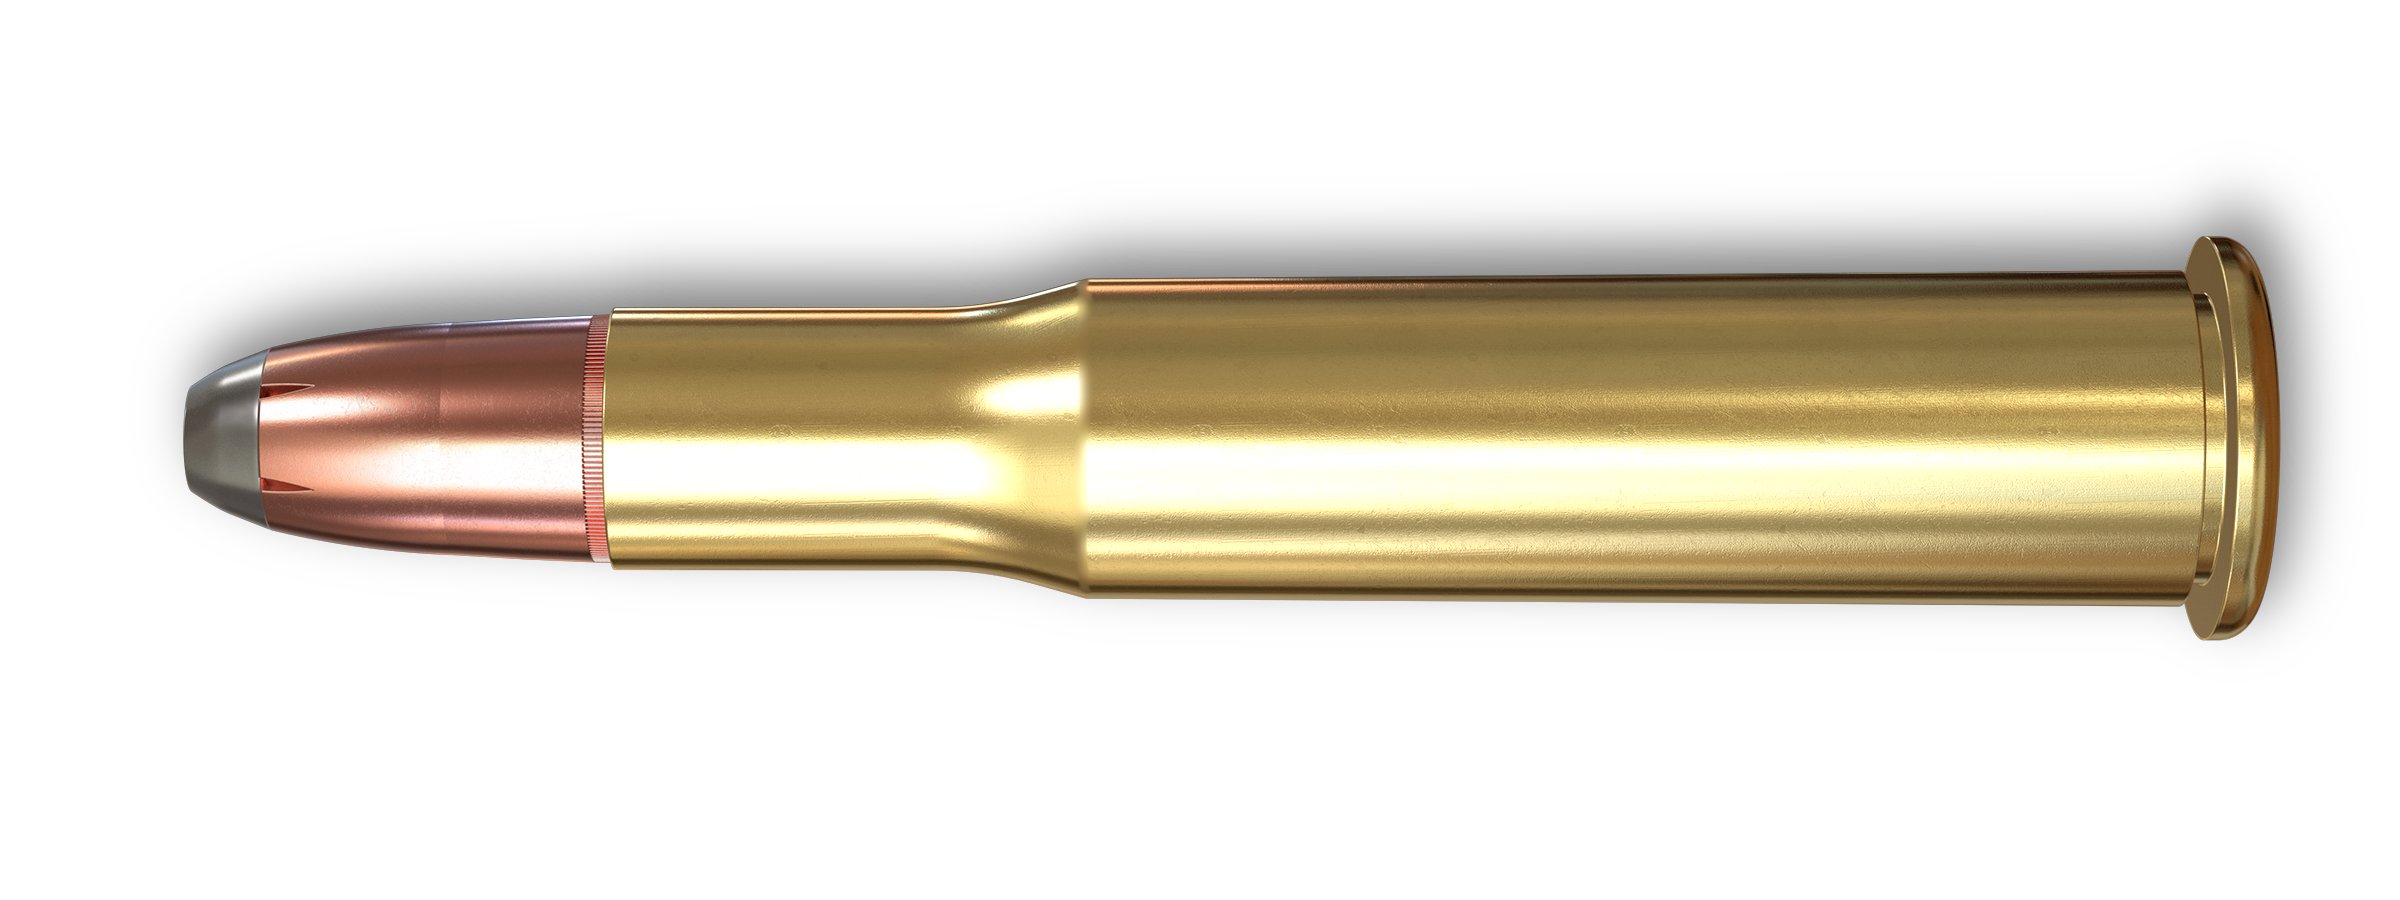 30-30 Winchester, 150 Grain Features